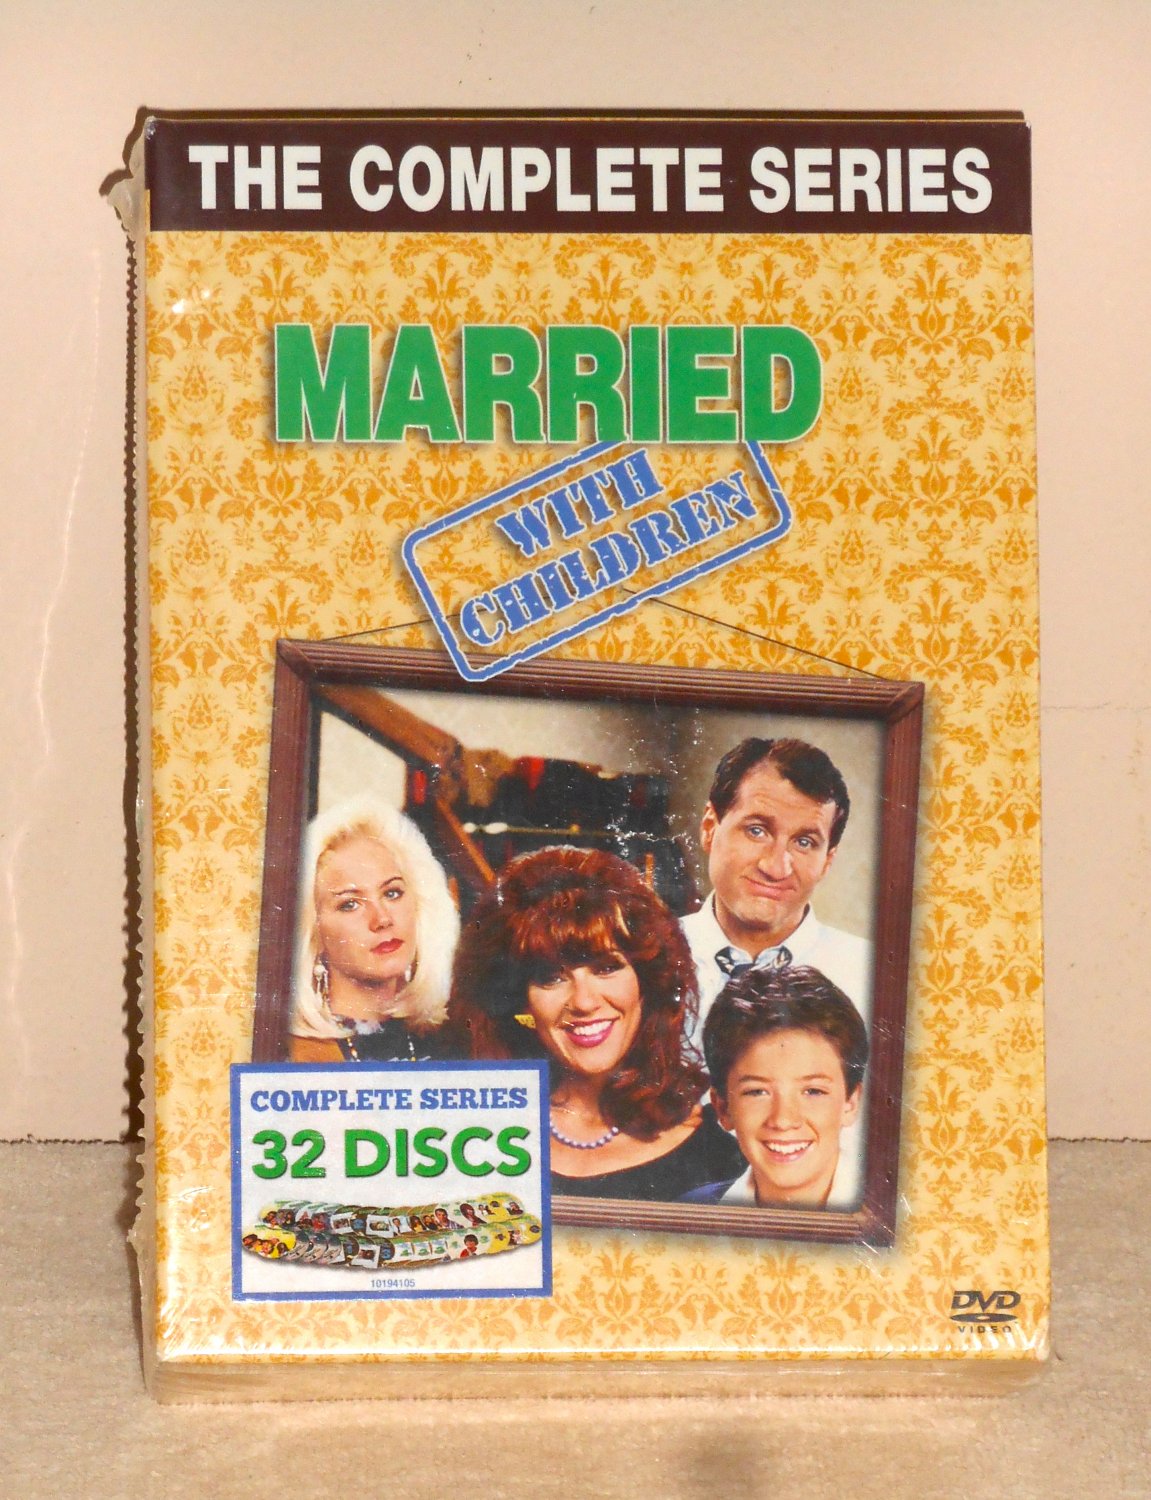 Married With Children Complete Series On DVD Video 32 Discs 38565 Sony 2011 Factory Sealed Box NIB